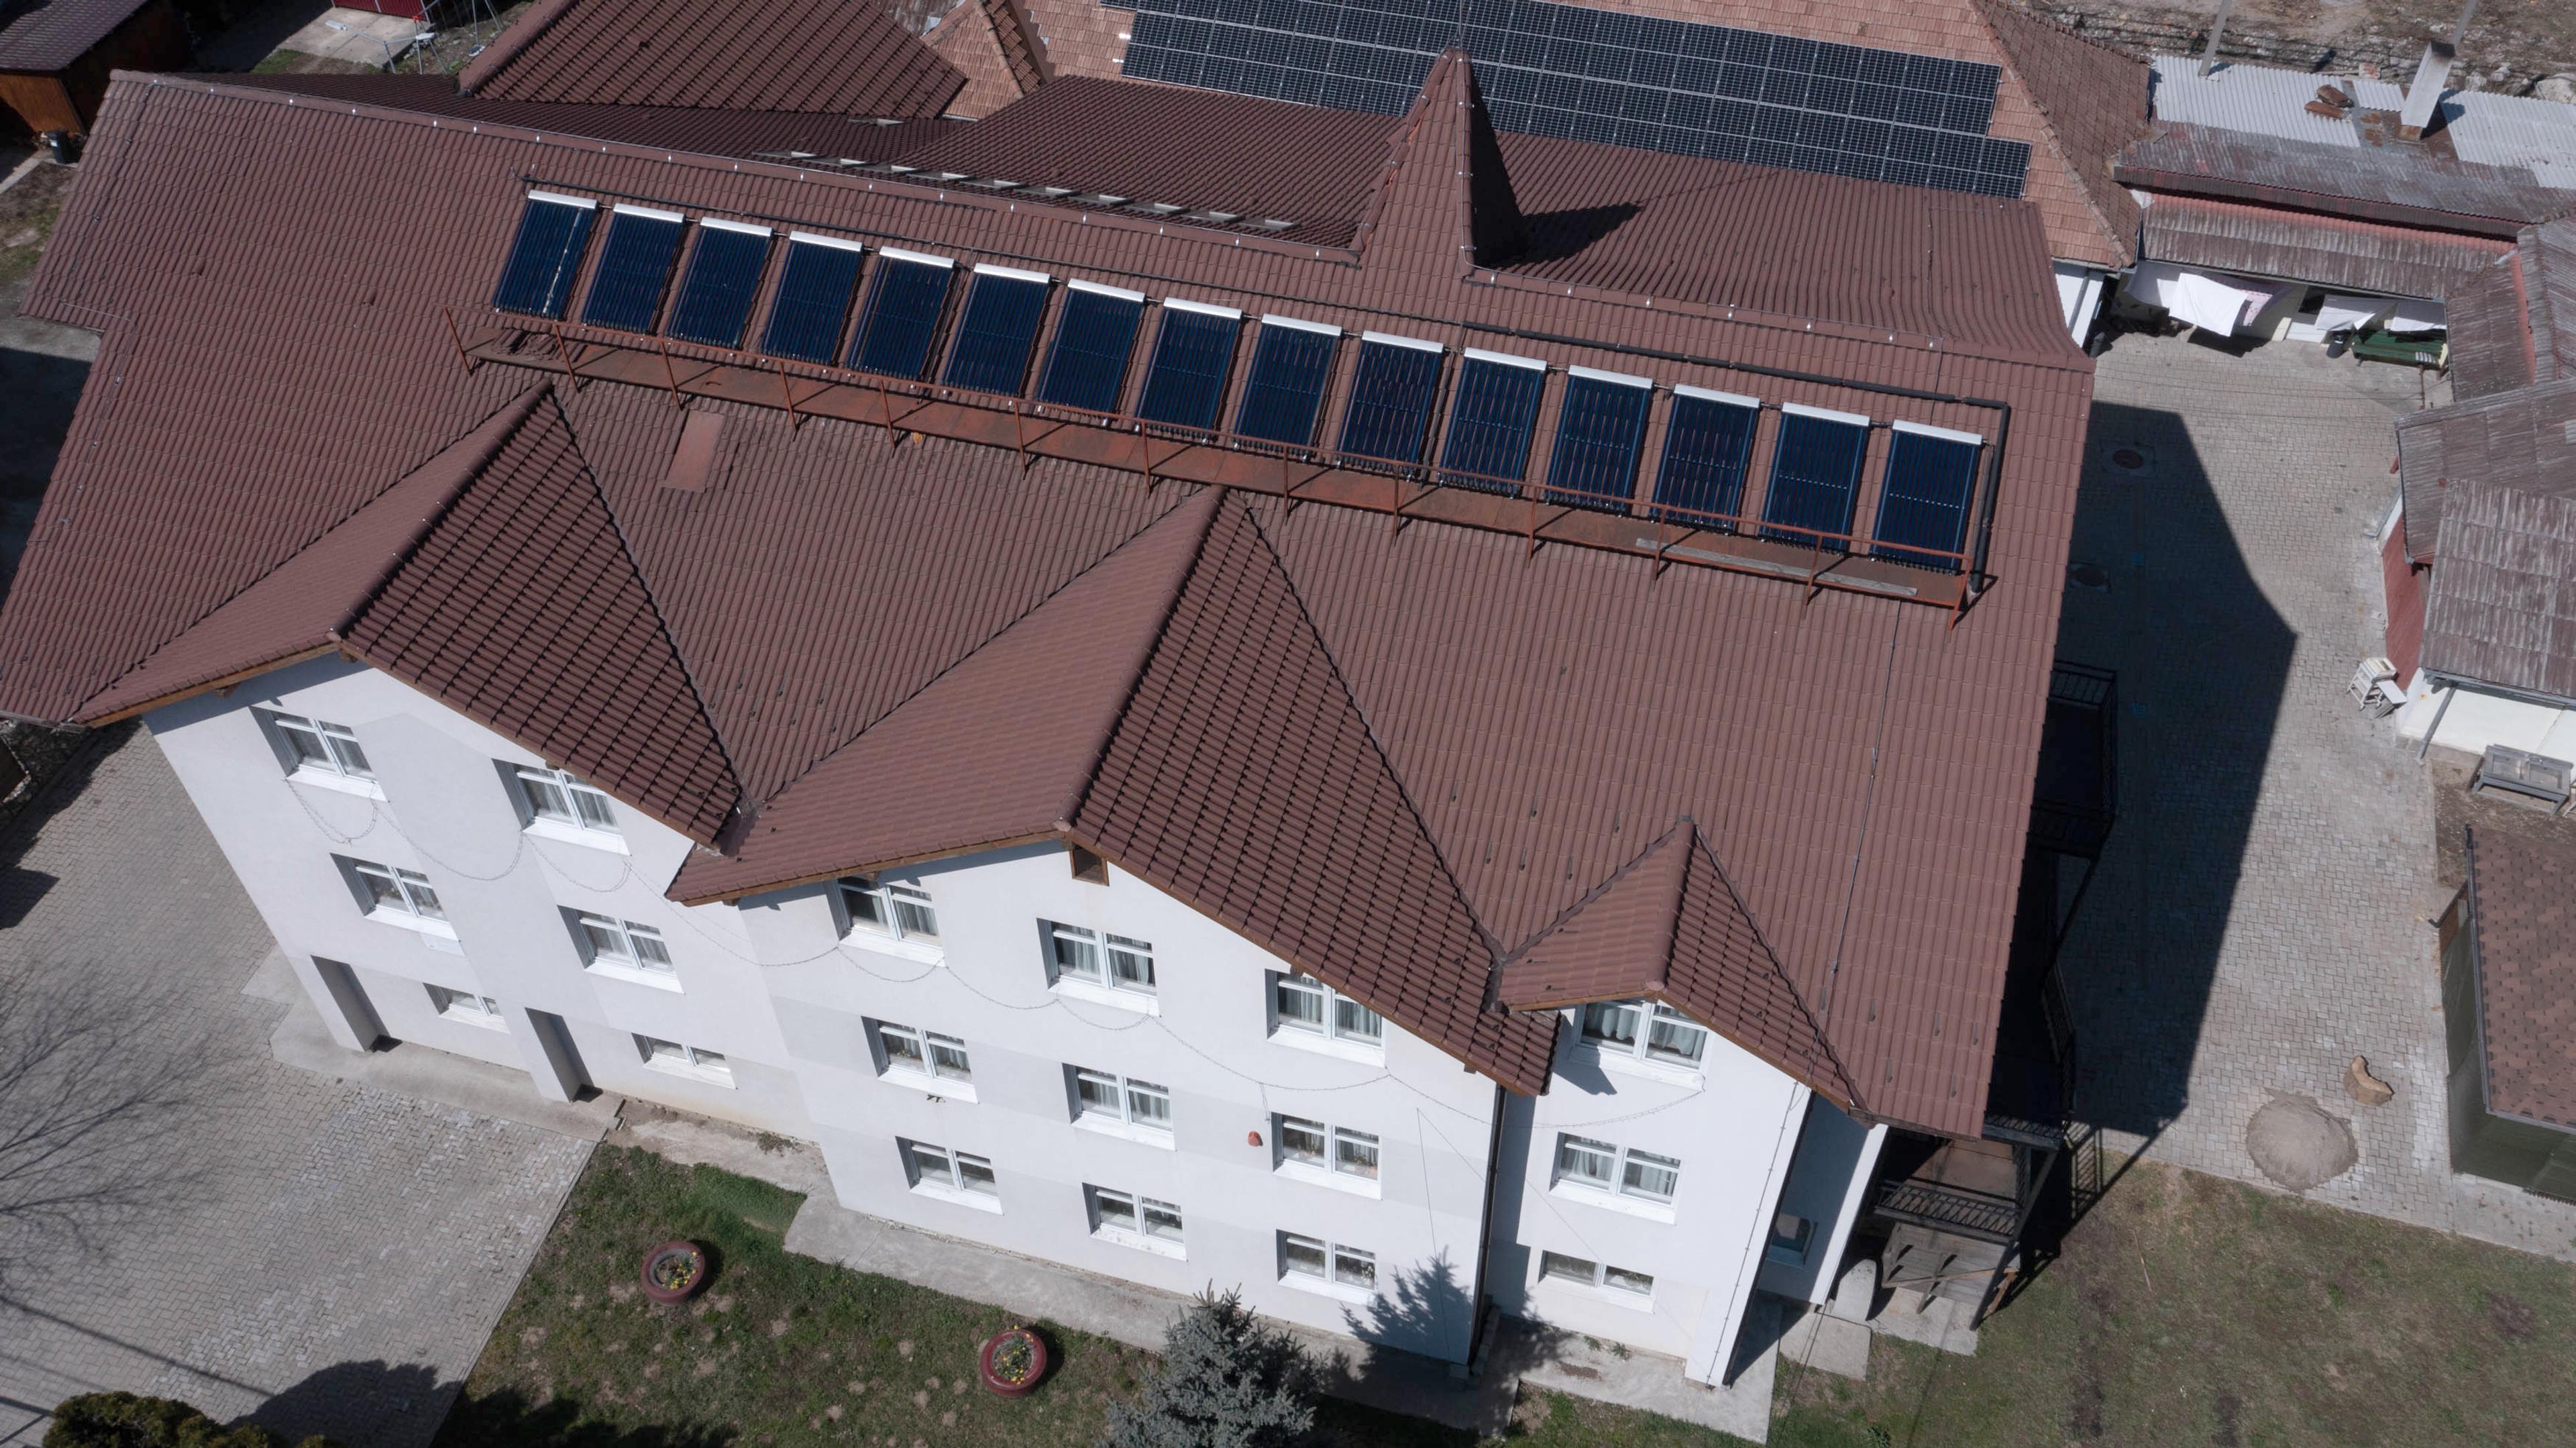 The hospital with solar panels on the roof